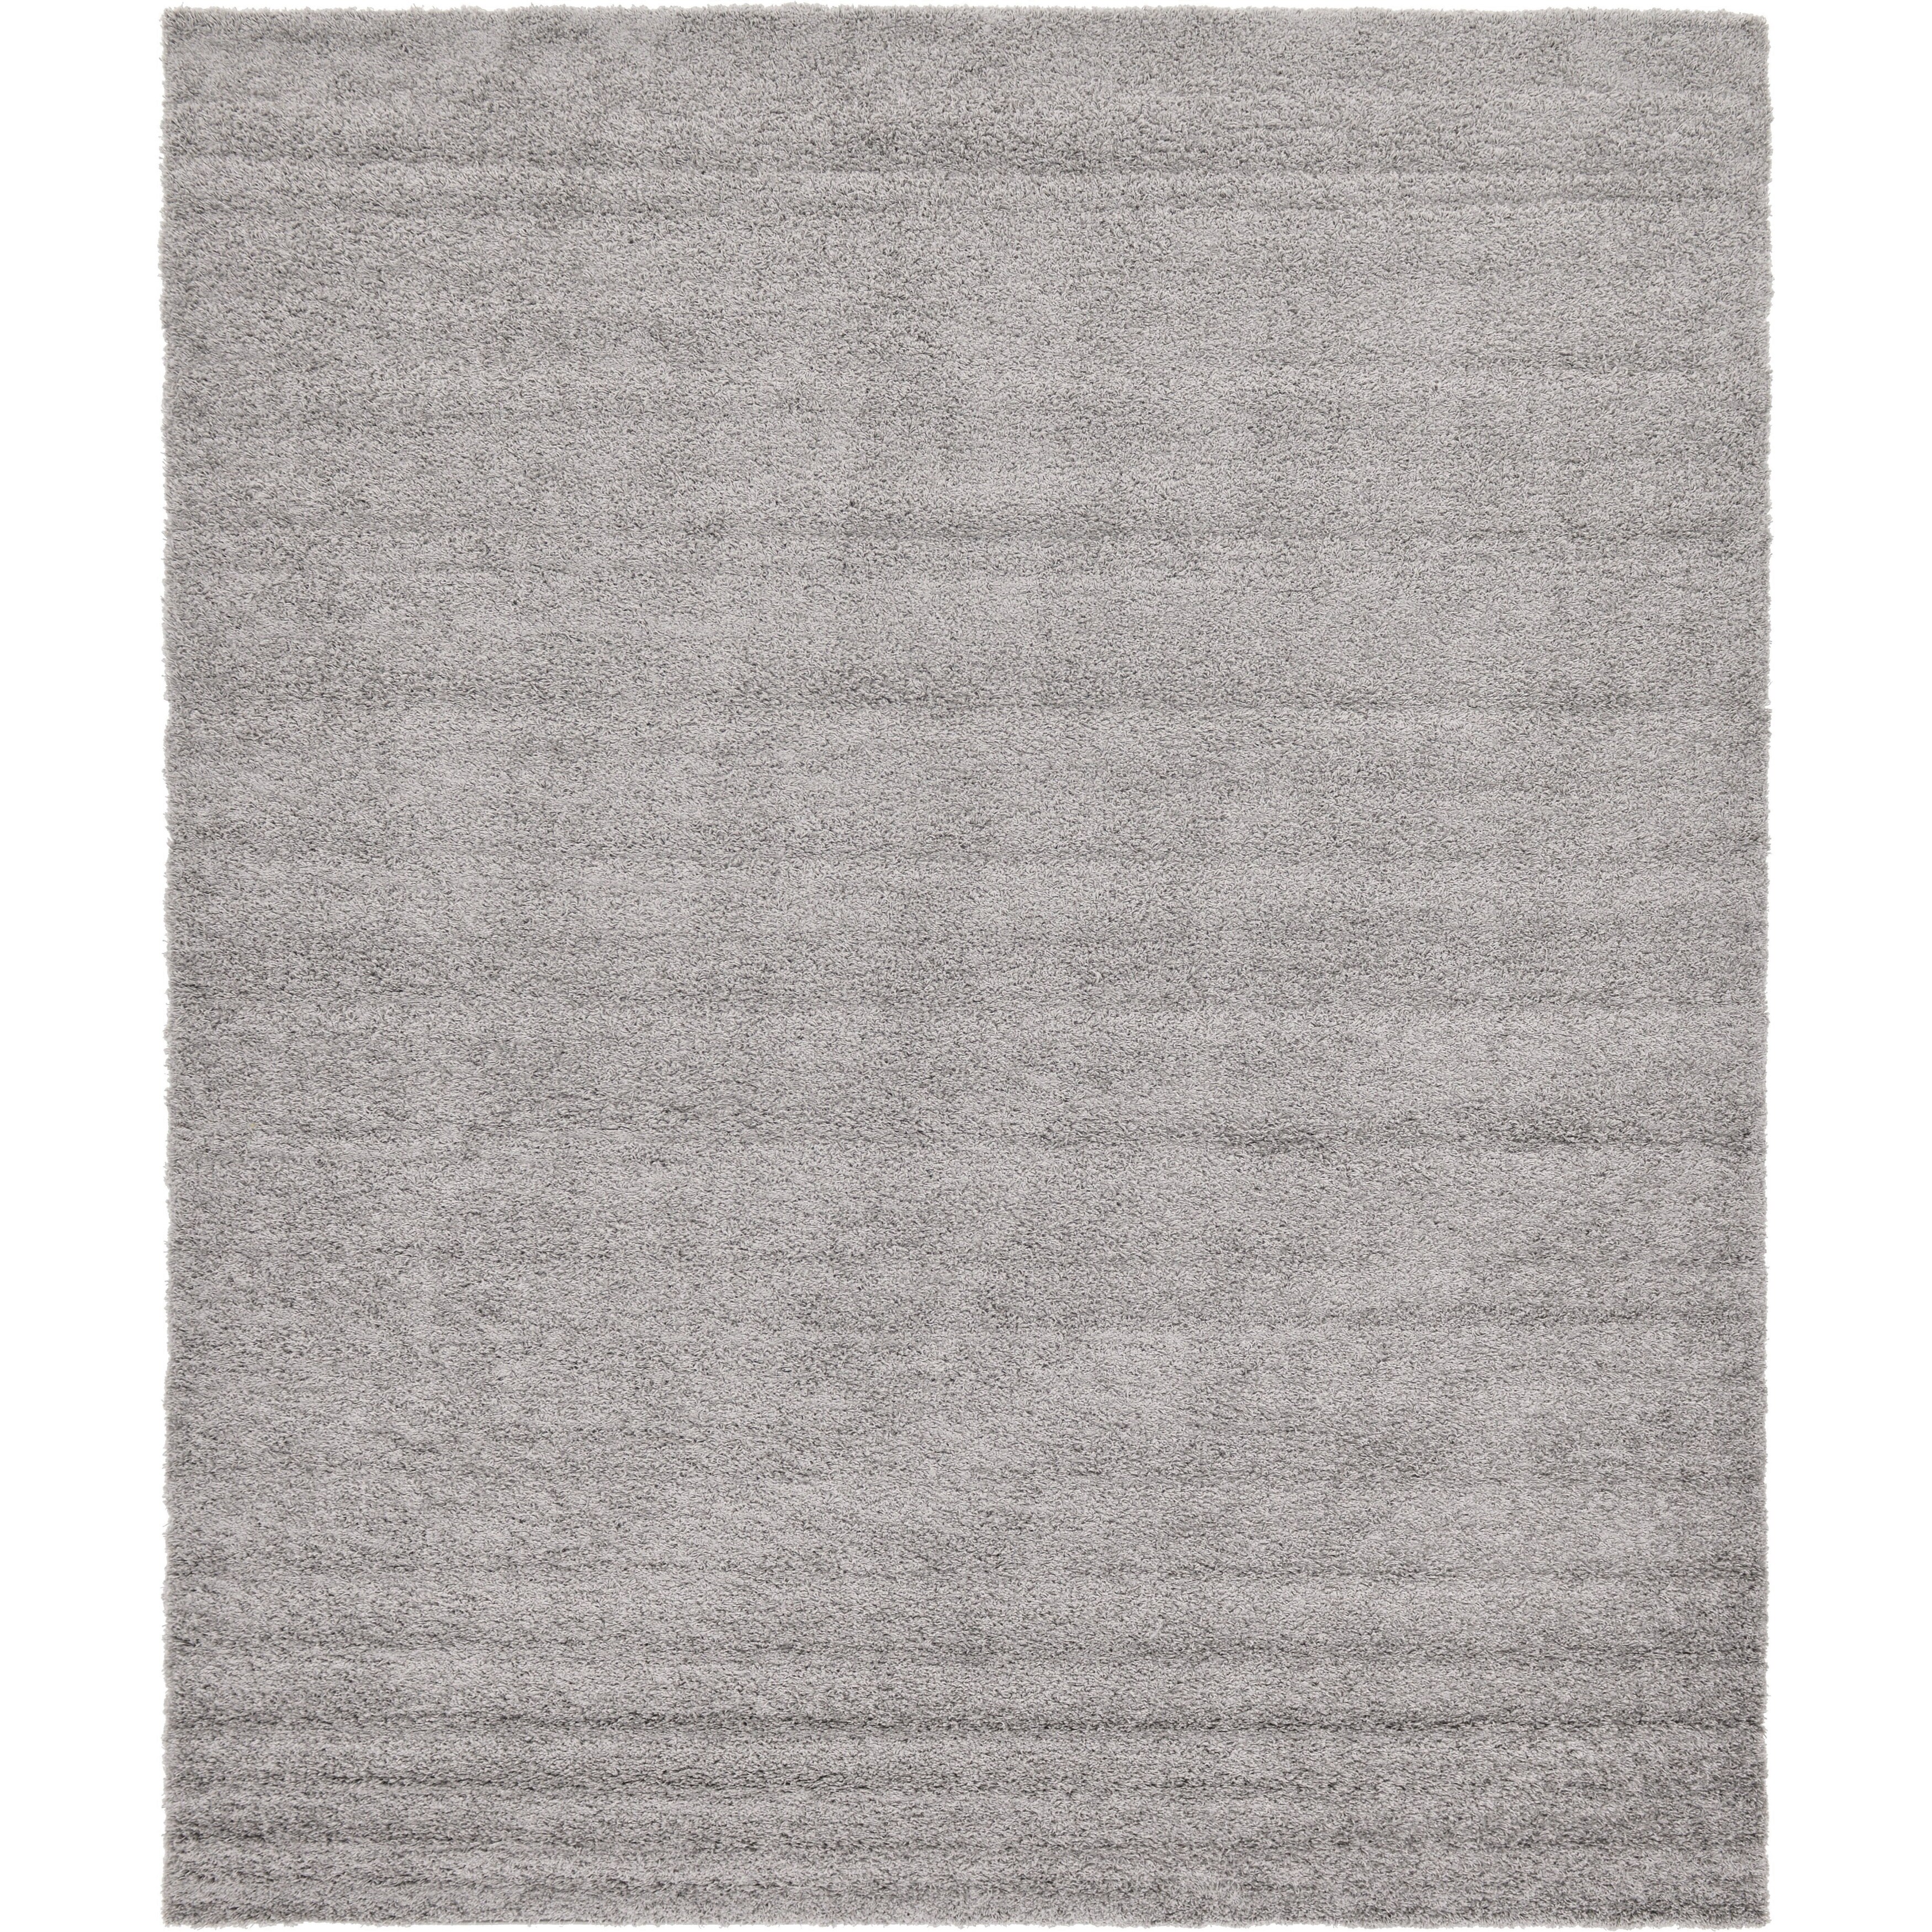 Buy Grey Shag Area Rugs Online At Overstockcom Our Best Rugs Deals